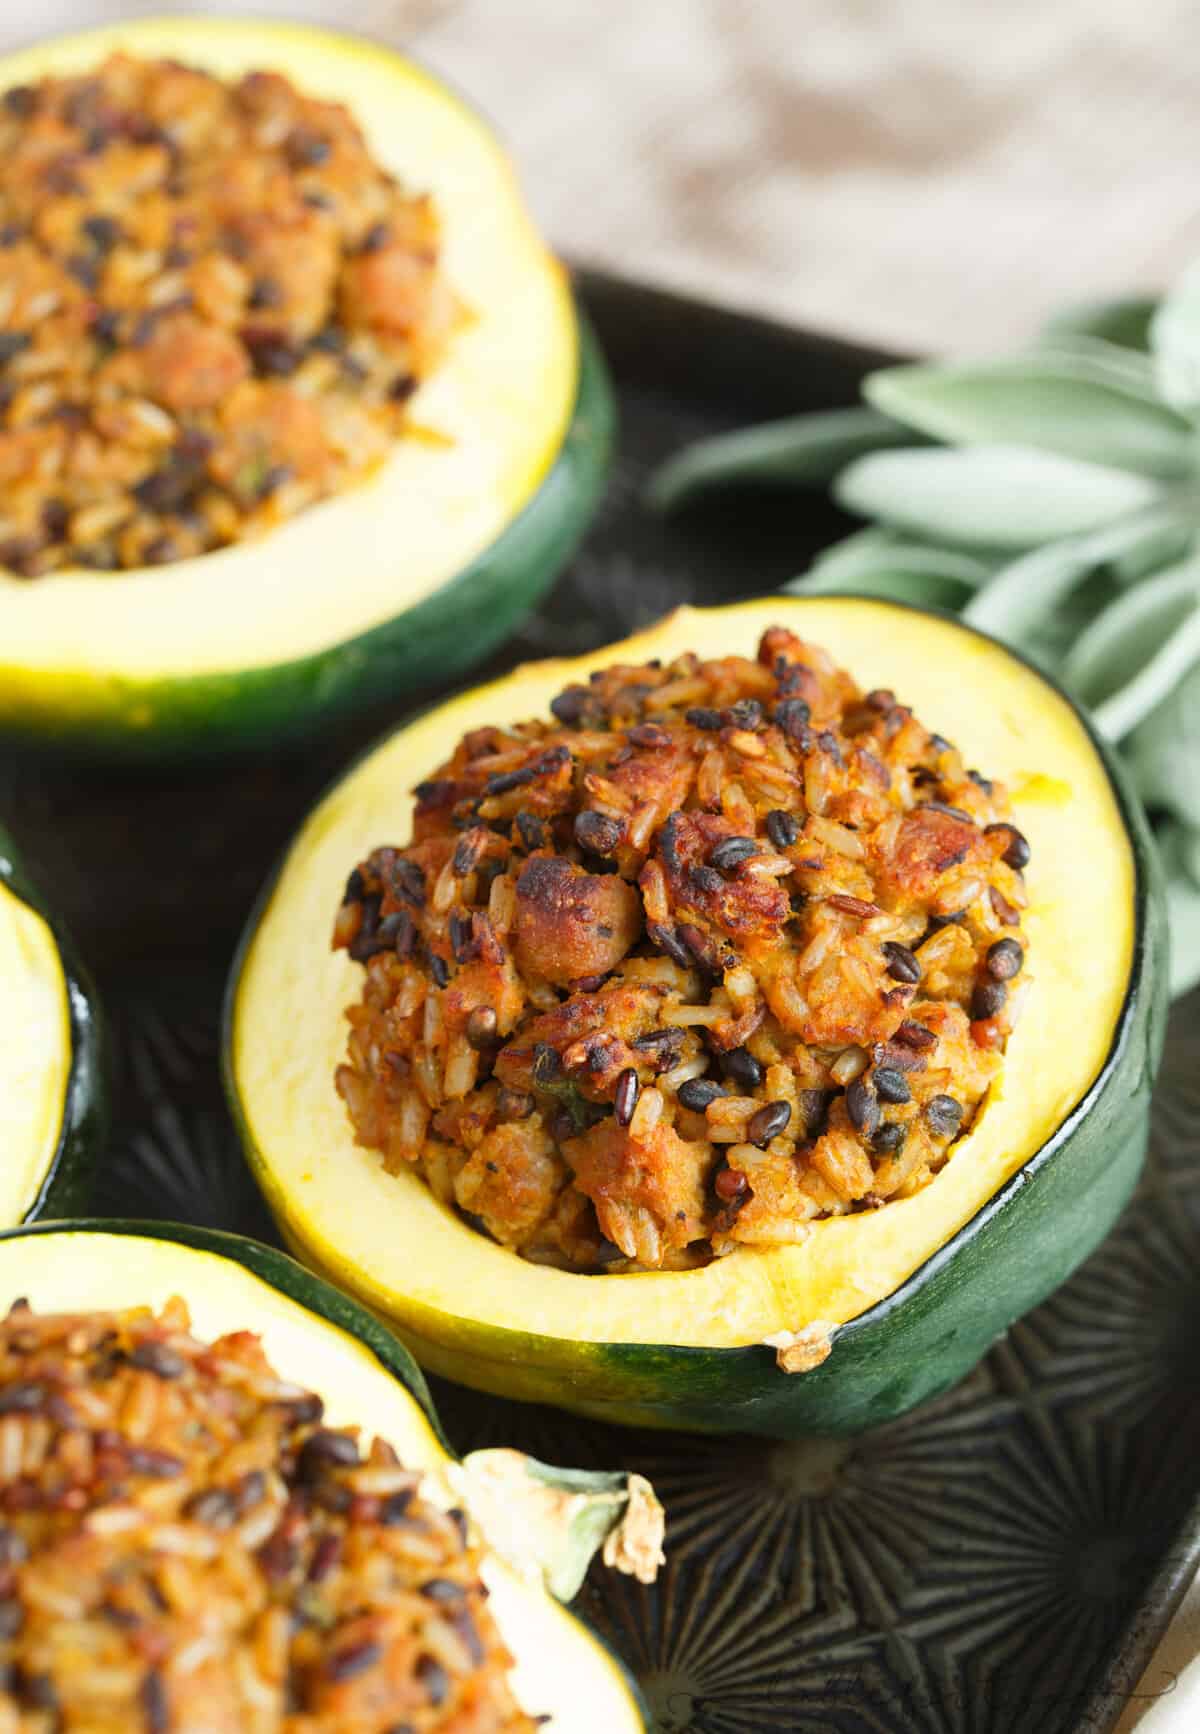 If you love the flavors of Fall, this stuffed acorn squash with sage apple sausage and wild rice is the squash recipe for you! So full of flavor & will fill you right up! A great new recipe to use for acorn squash. Who doesn't love stuffing acorn squash? The best flavors!